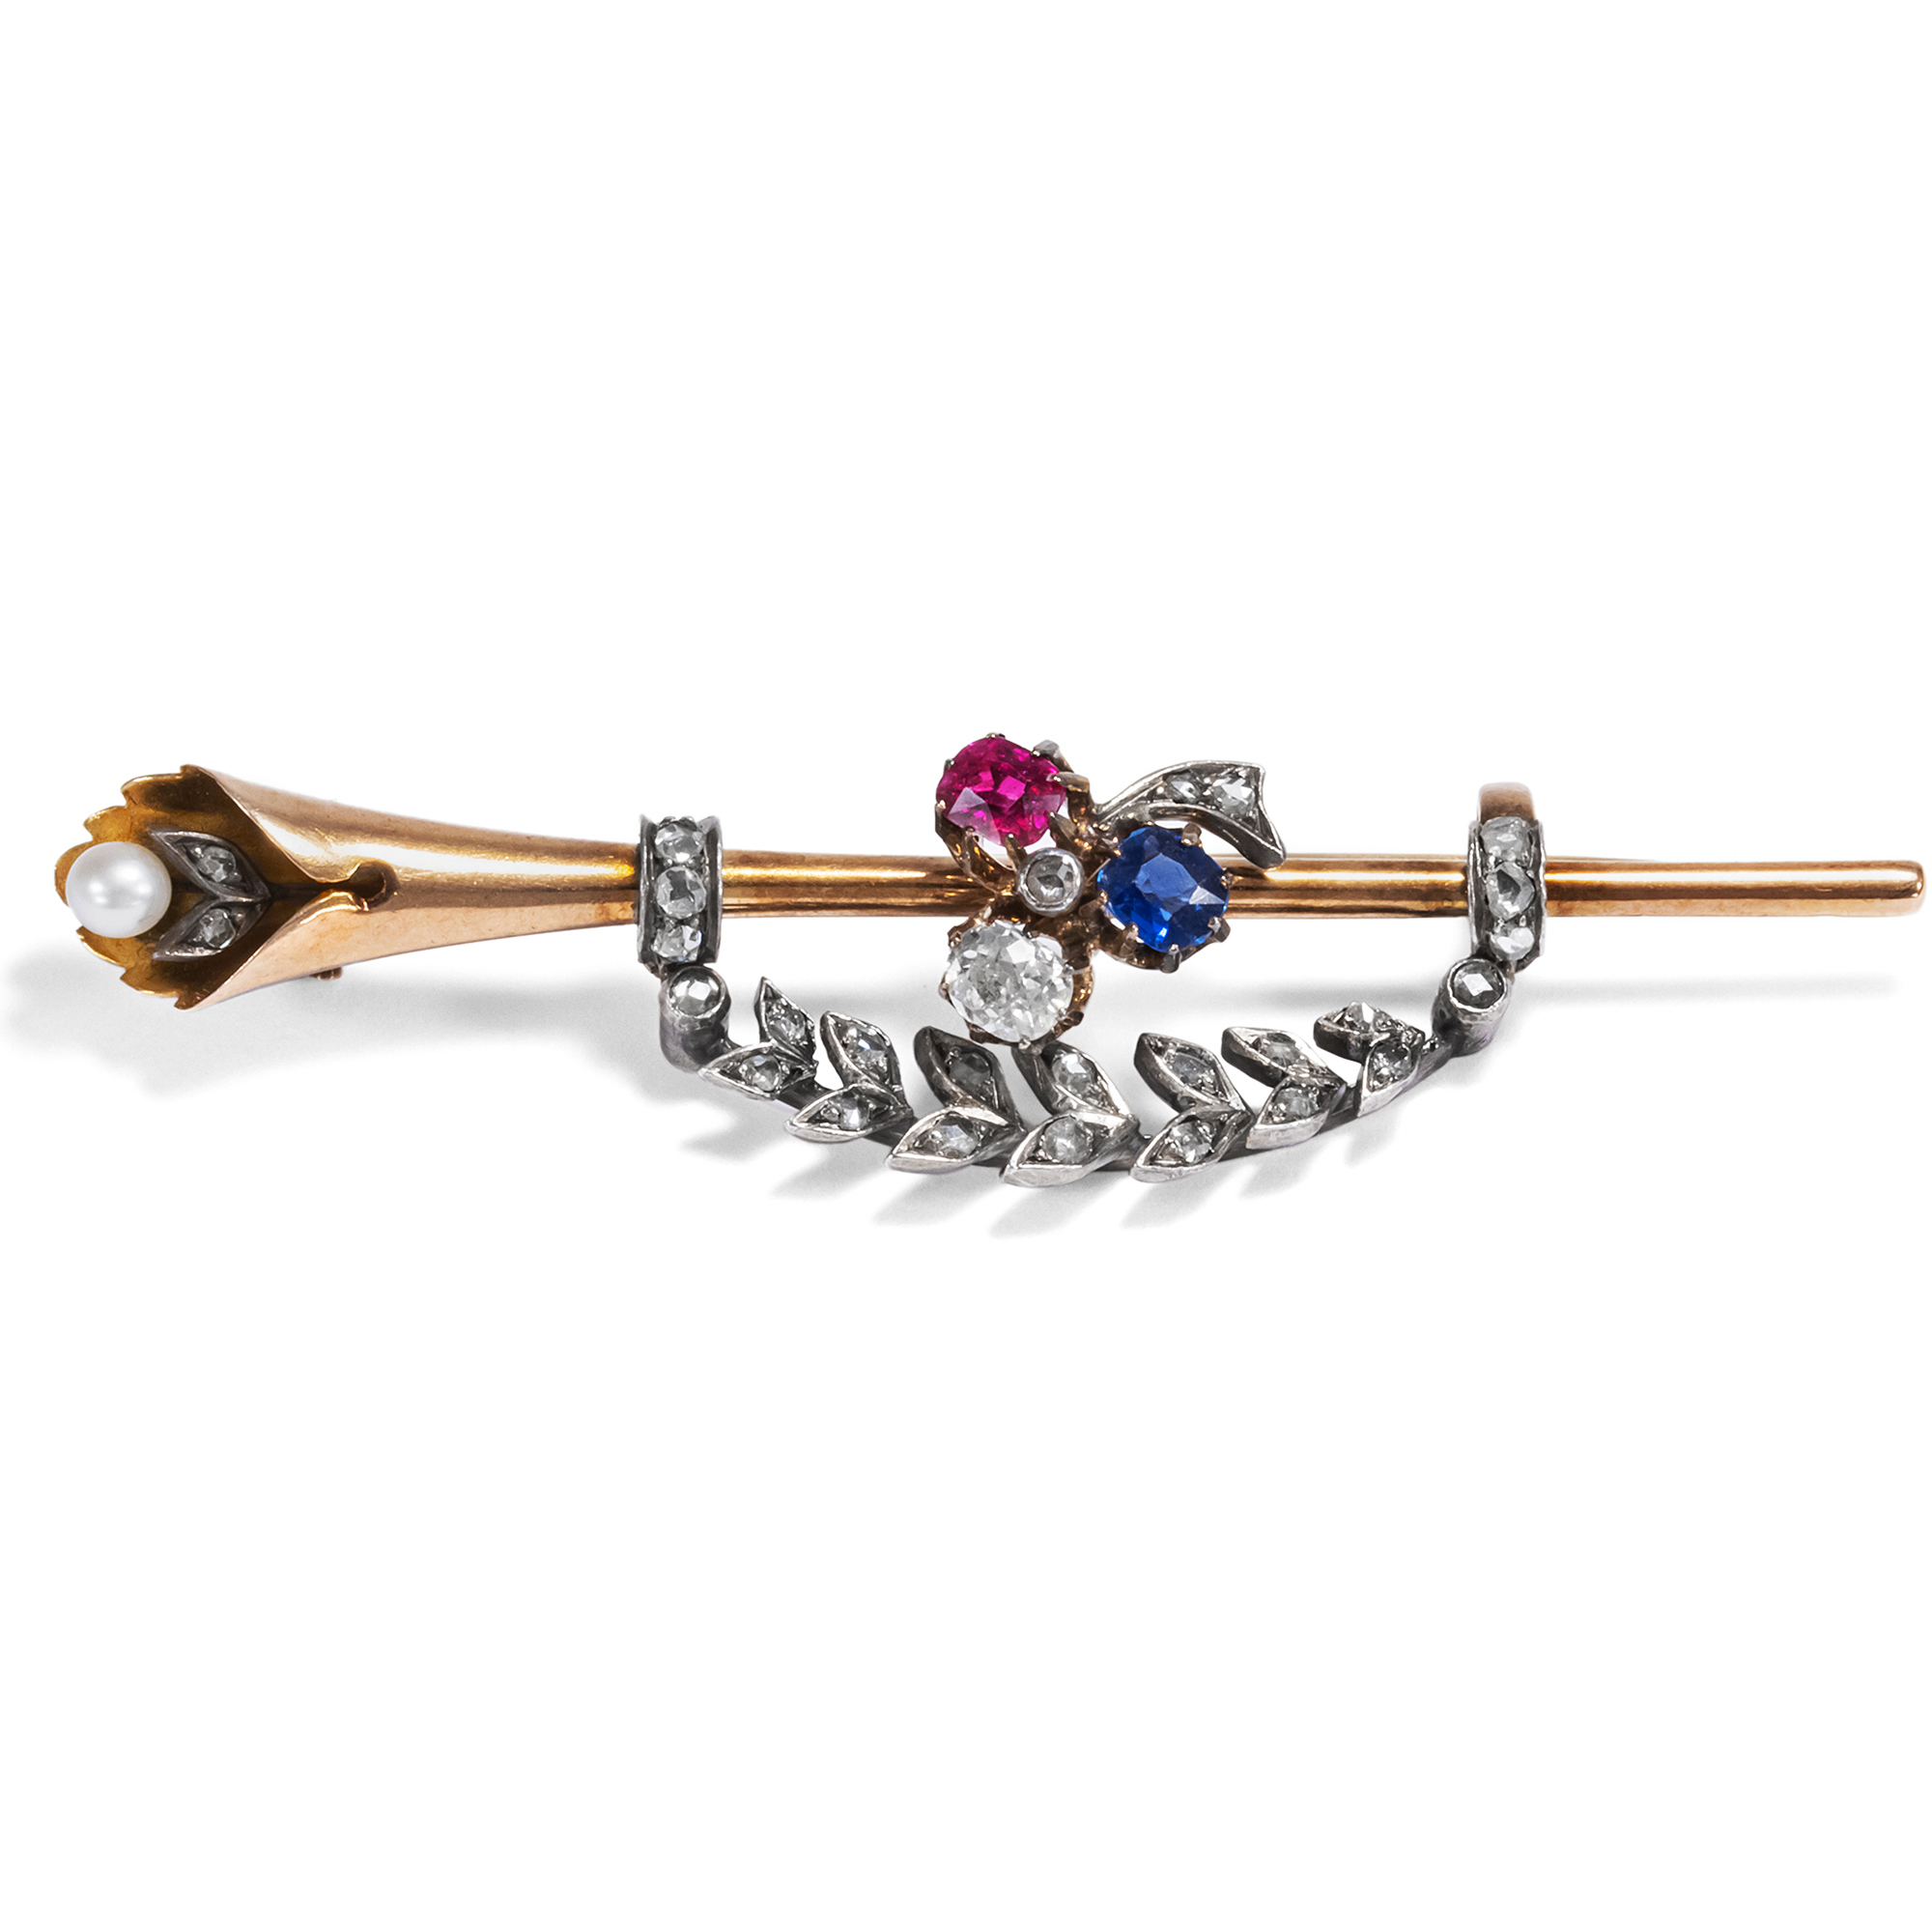 Antique Diamond, Sapphire & Ruby Brooch Made of Gold & Silver, ca. 1890